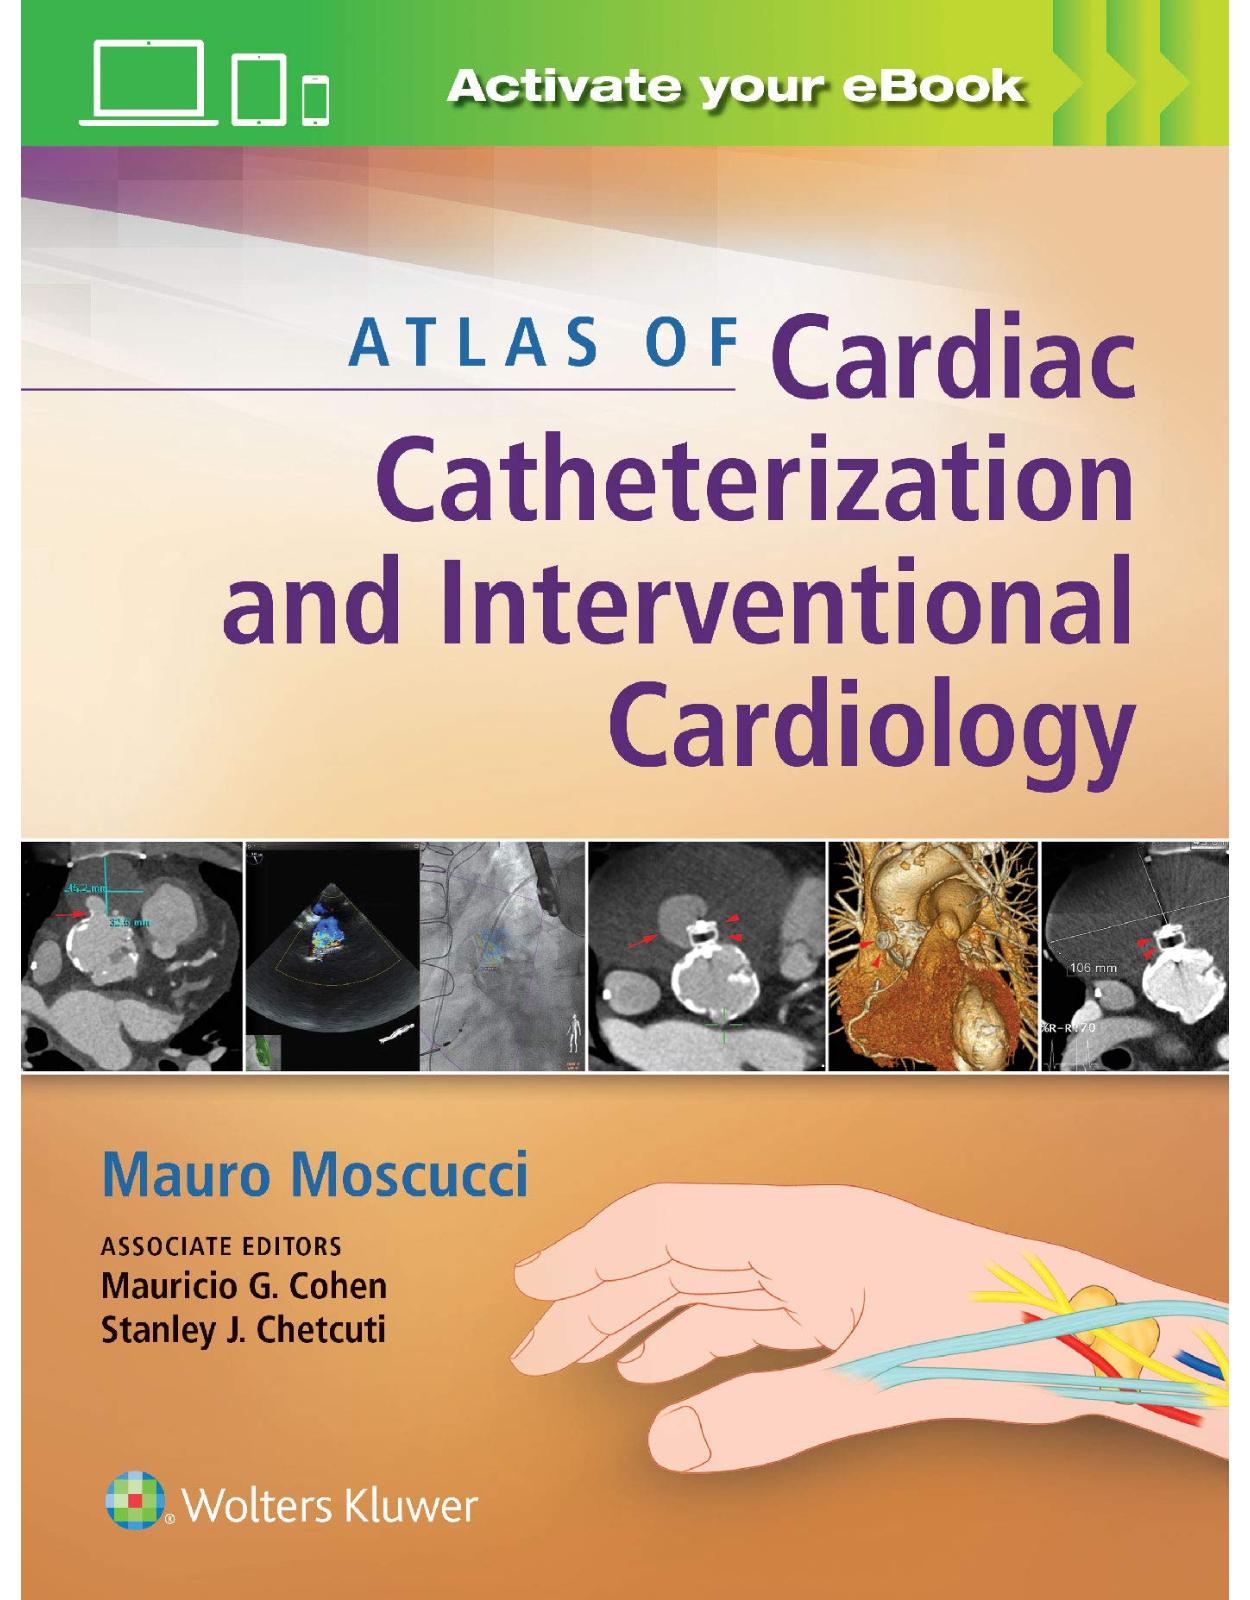 Atlas of Cardiac Catheterization and Interventional Cardiology: Practical Images for Diagnosis and Ablation 